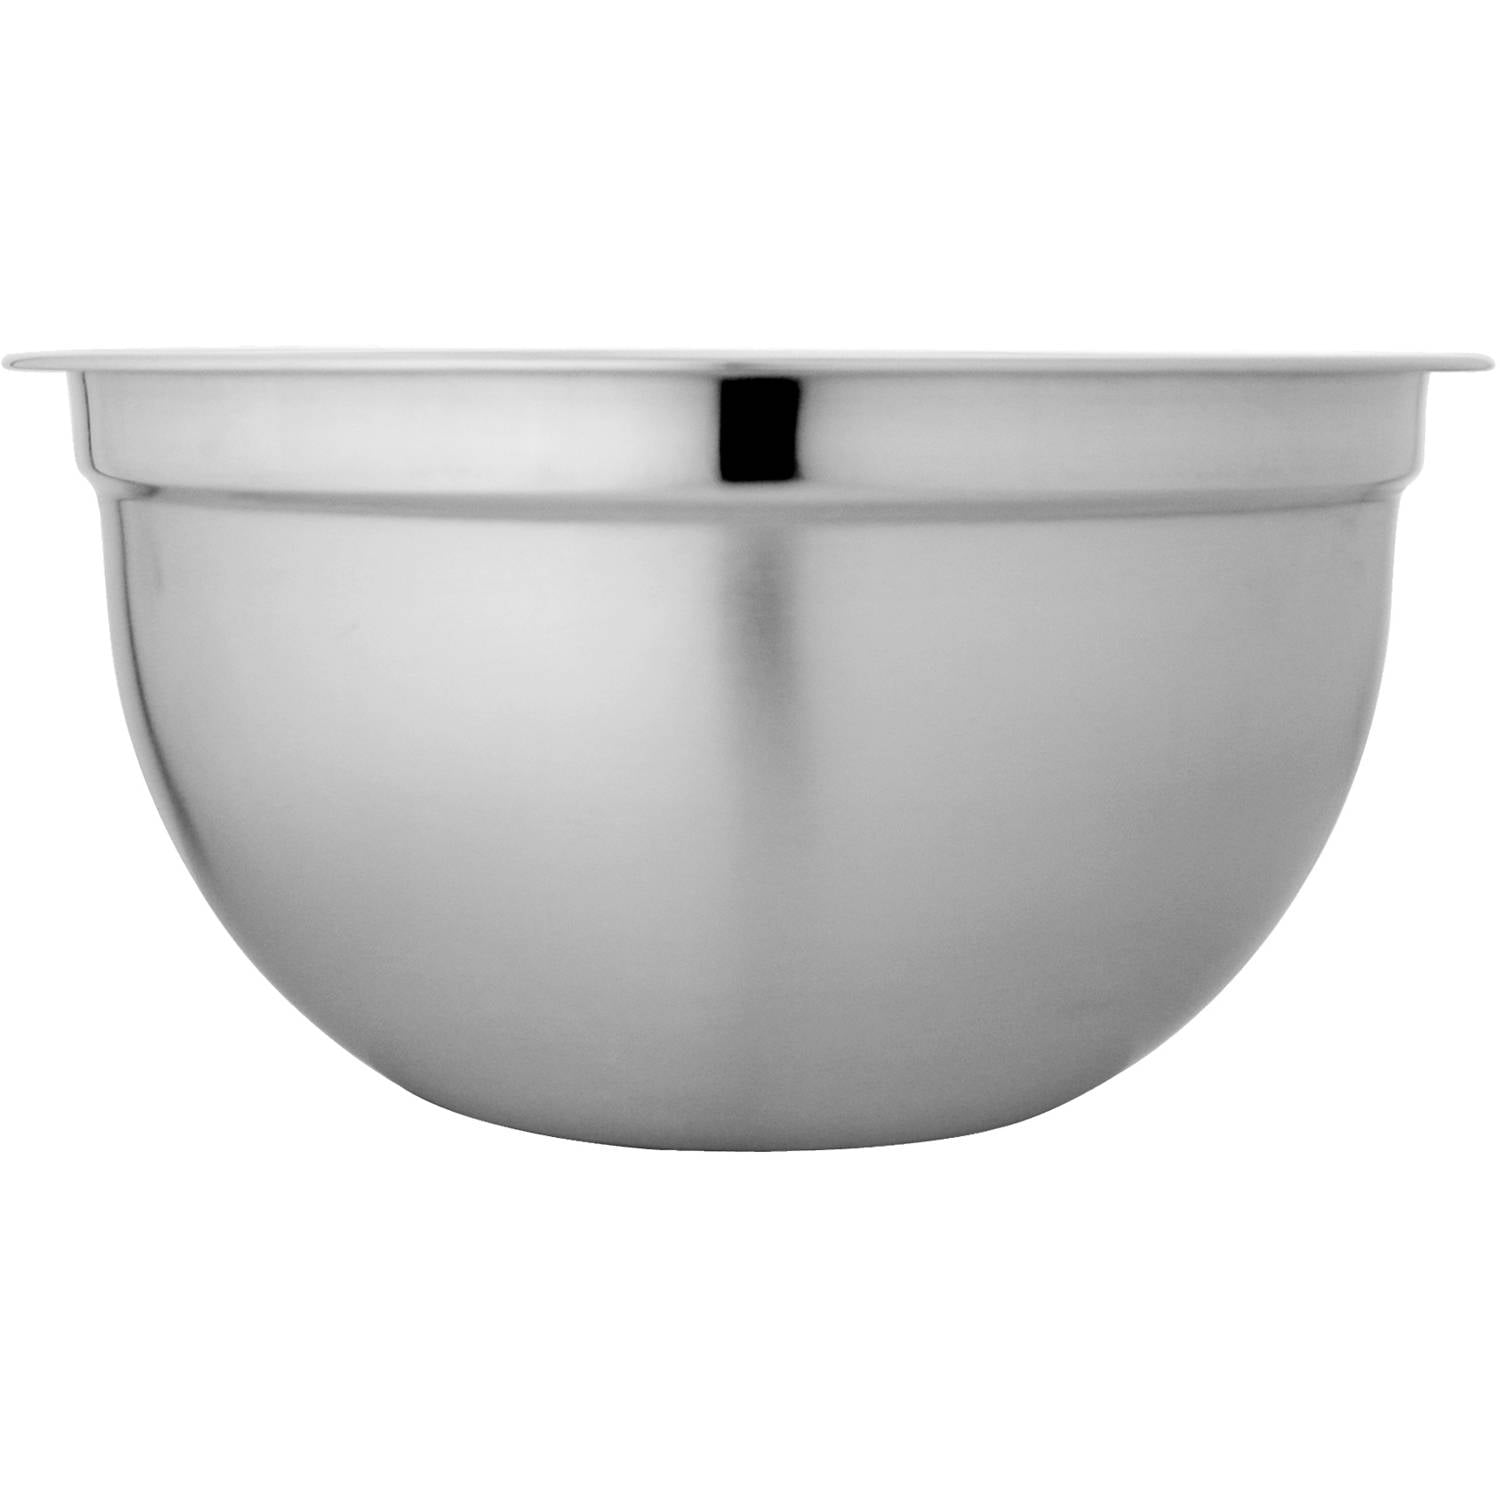 Vollrath 8 Piece Heavy-Duty Stainless Steel Mixing Bowl Set - 8/Set